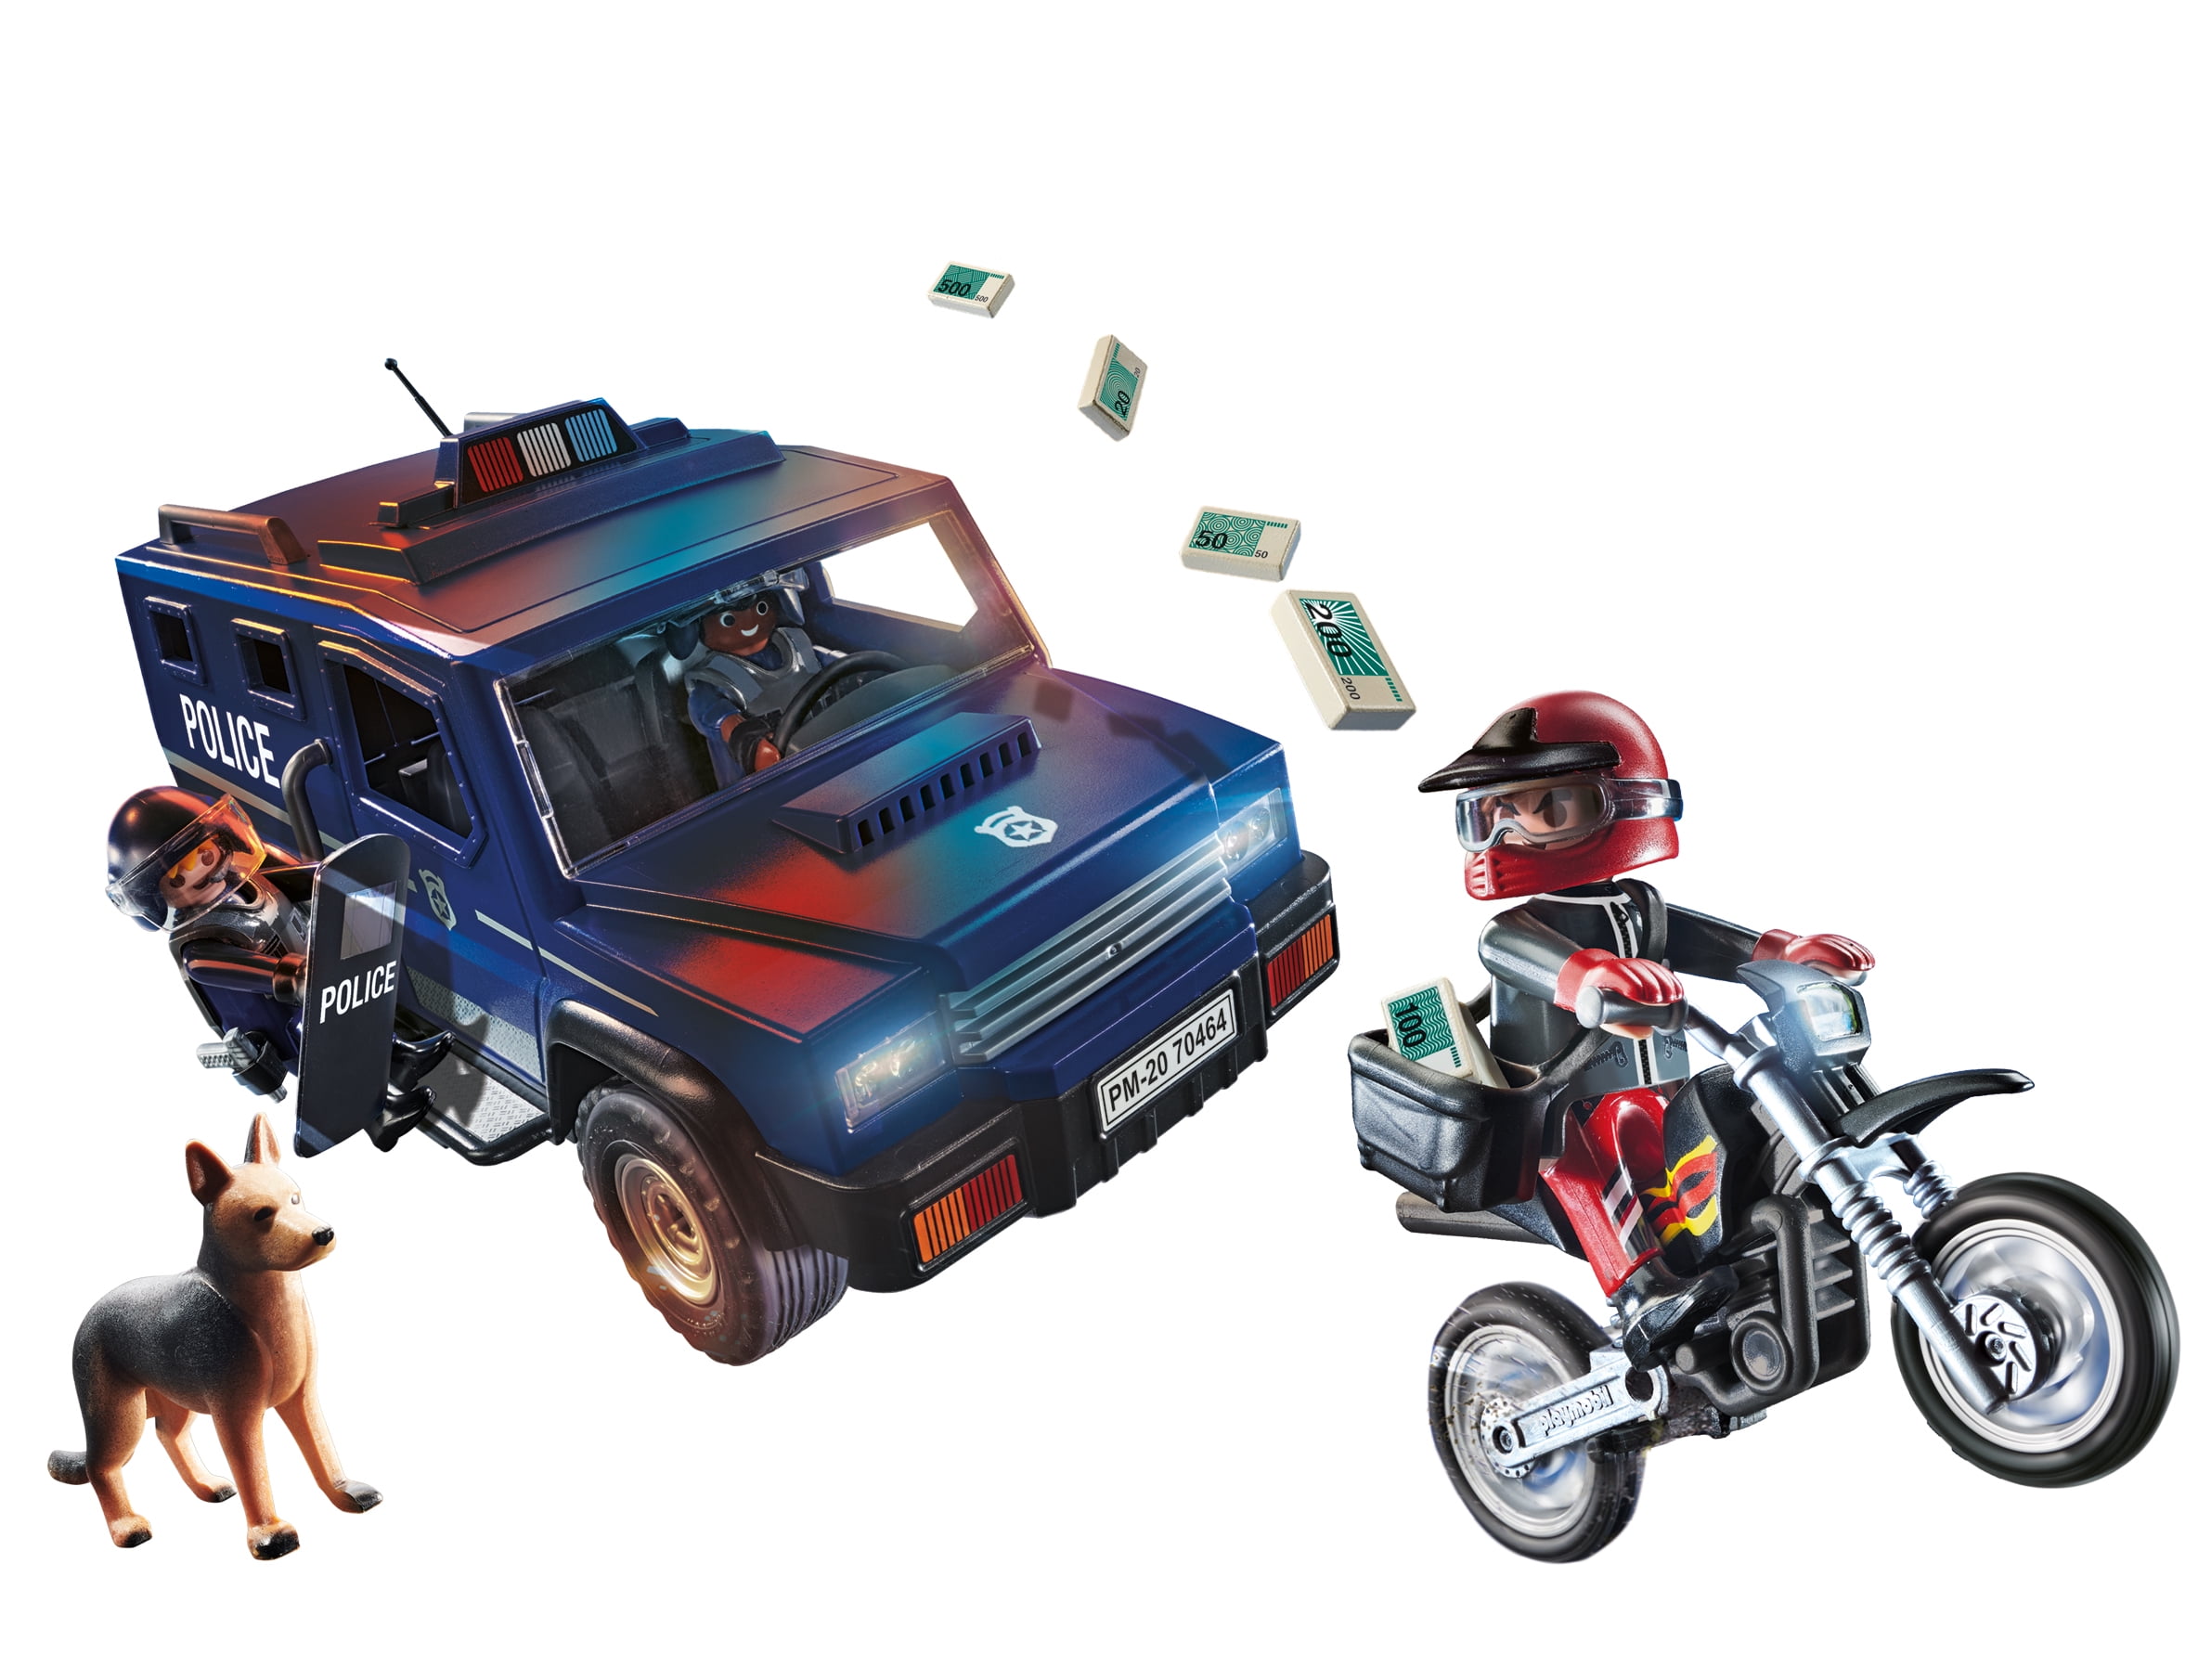 Give historie fiber PLAYMOBIL High-Speed Chase Action Figure Set - Walmart.com